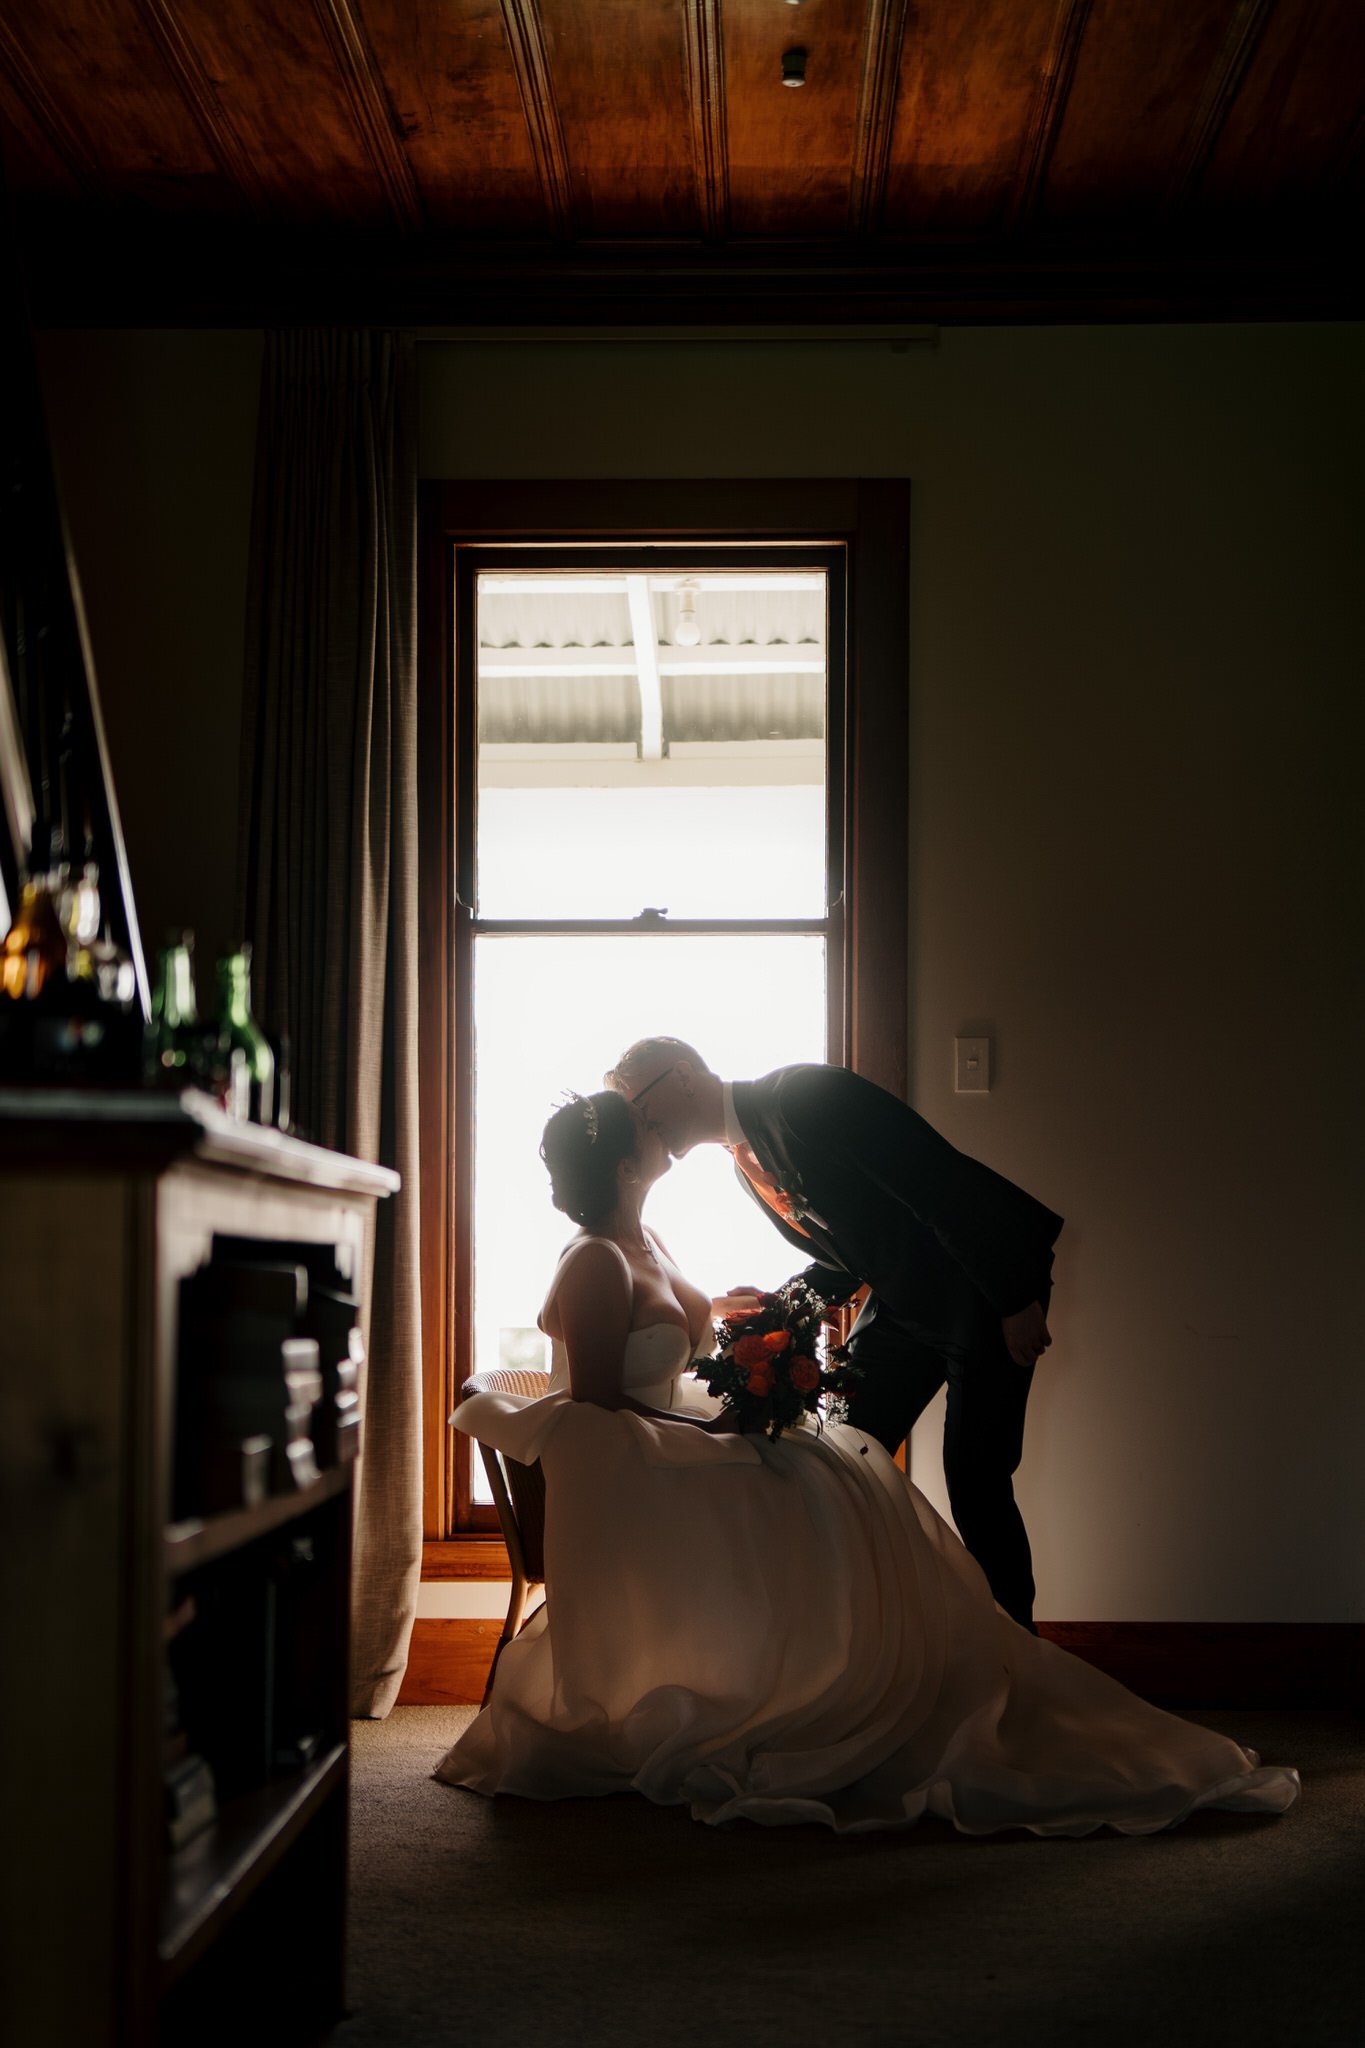 huntly-house-auckland-wedding-venue-mansion-vintage-luxury-accommodation-photographer-videography-dear-white-productions-photo-film-south-clarks-beach (95).jpg